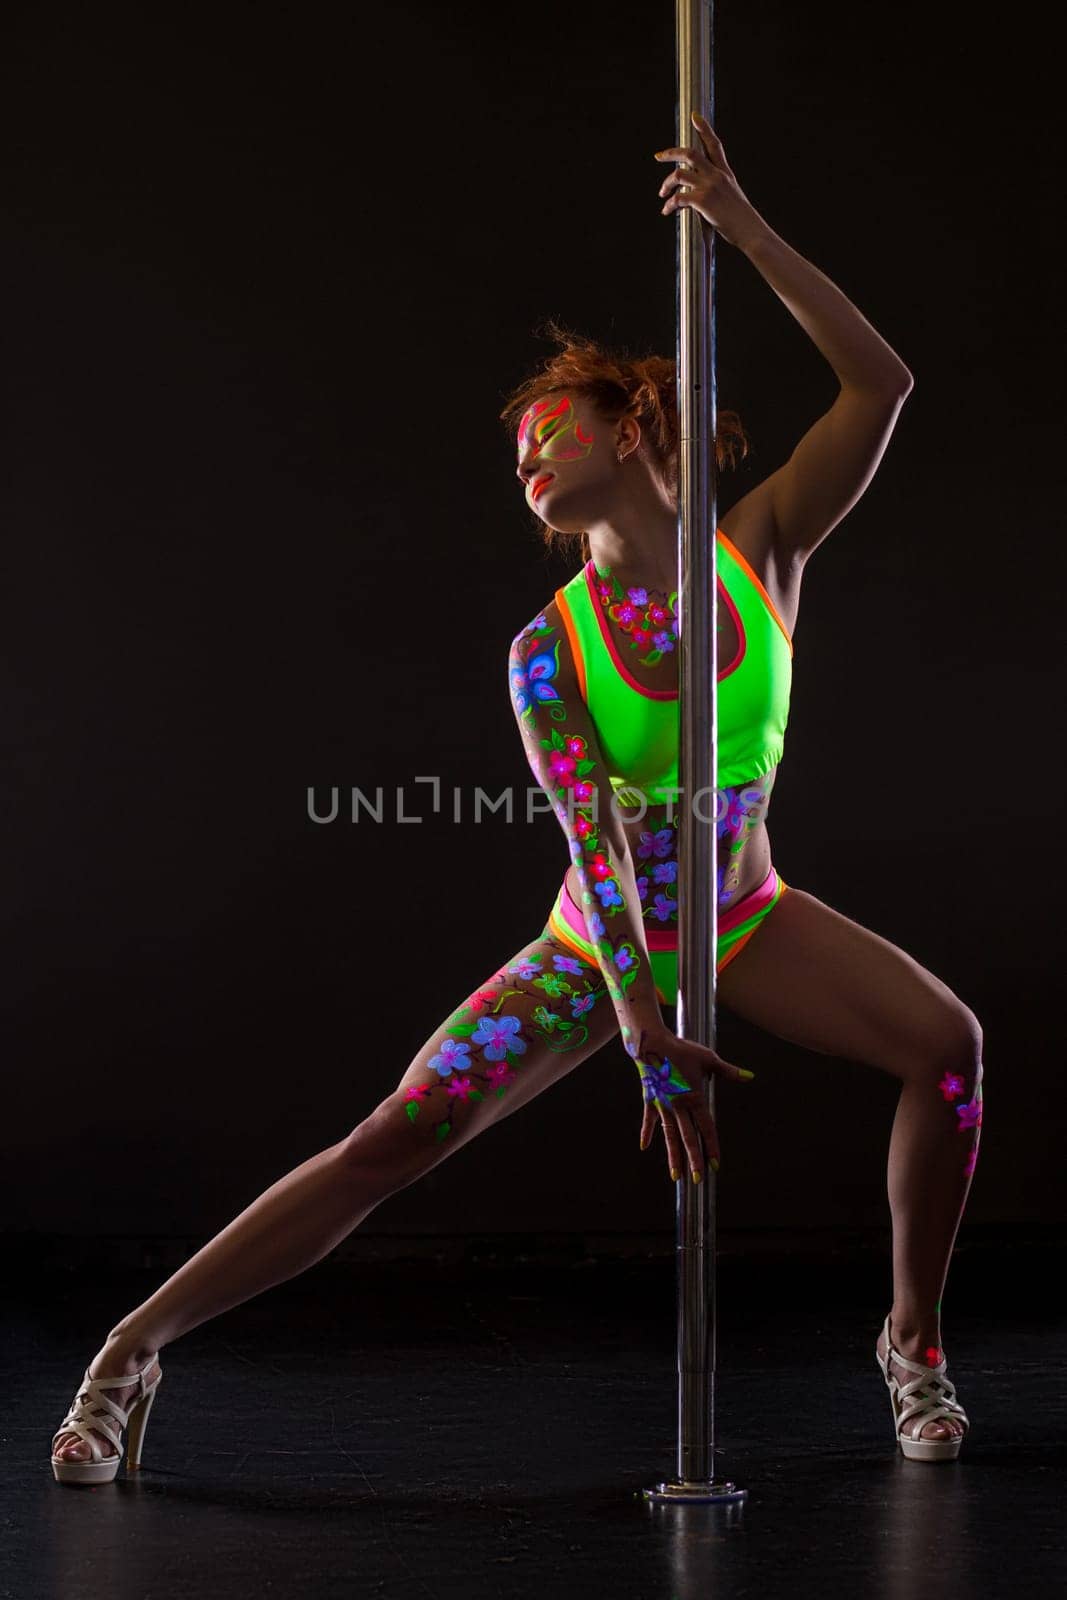 Beautiful pole dancer with glowing patterns on her body